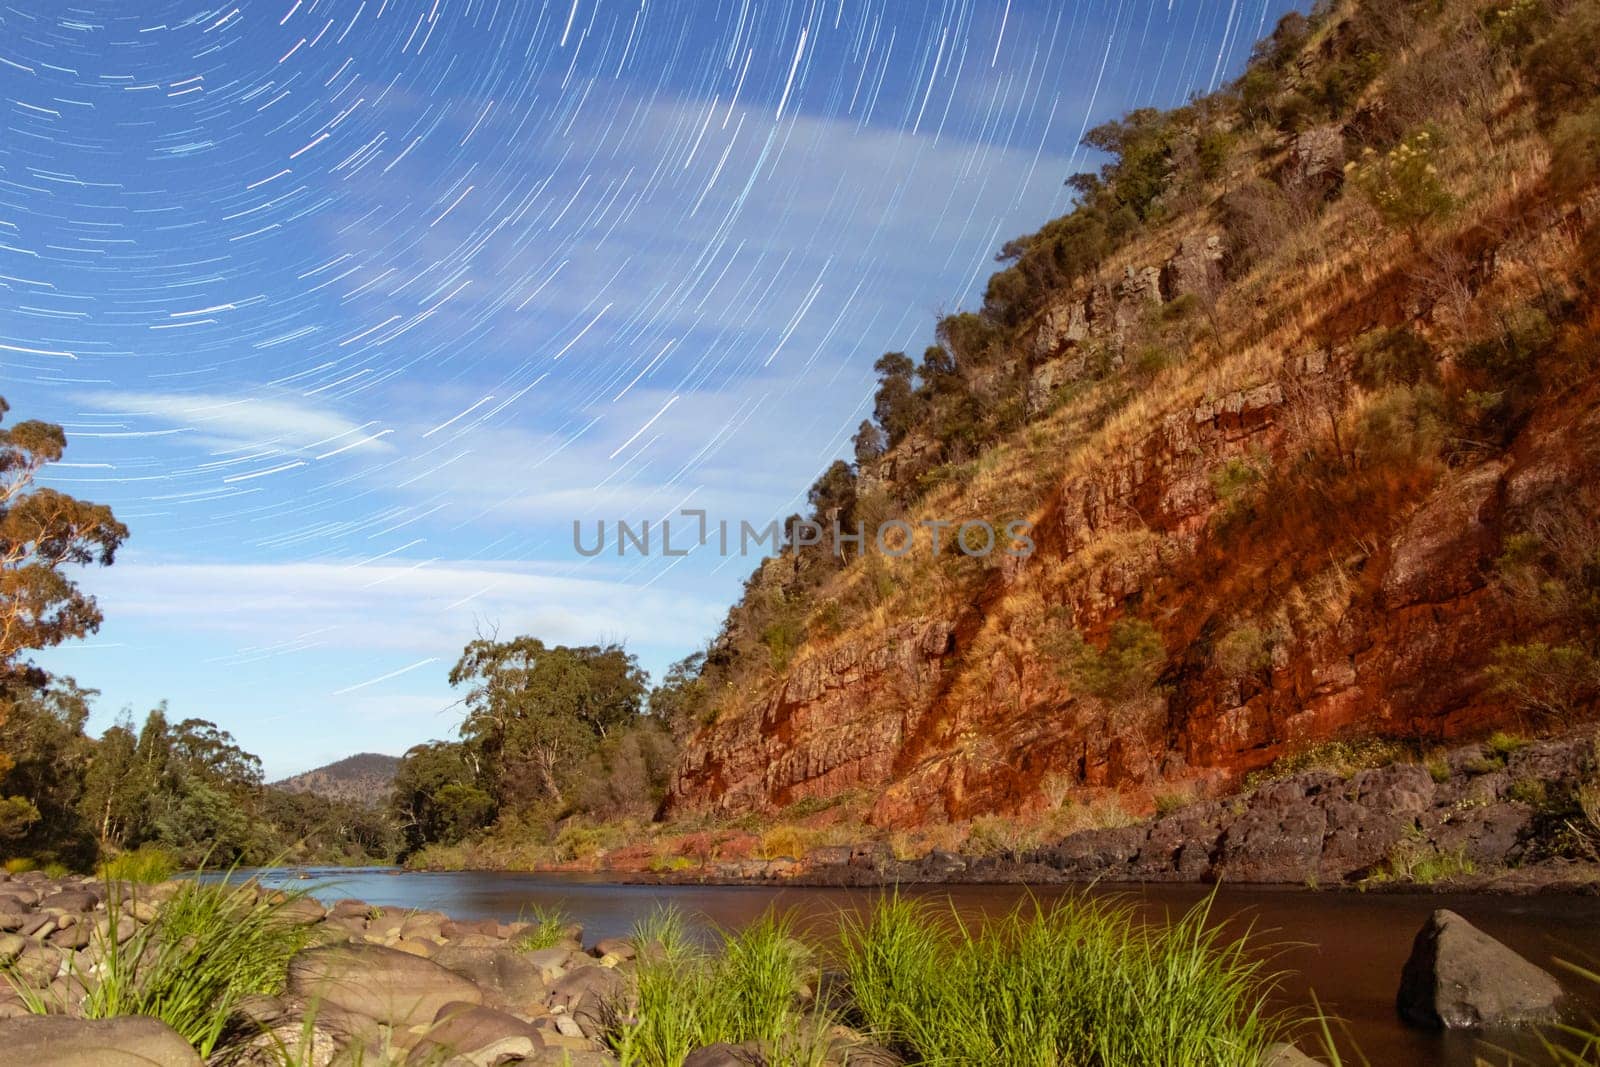 Stars trail across the night sky with a red rock gorge framing a running river in Australia